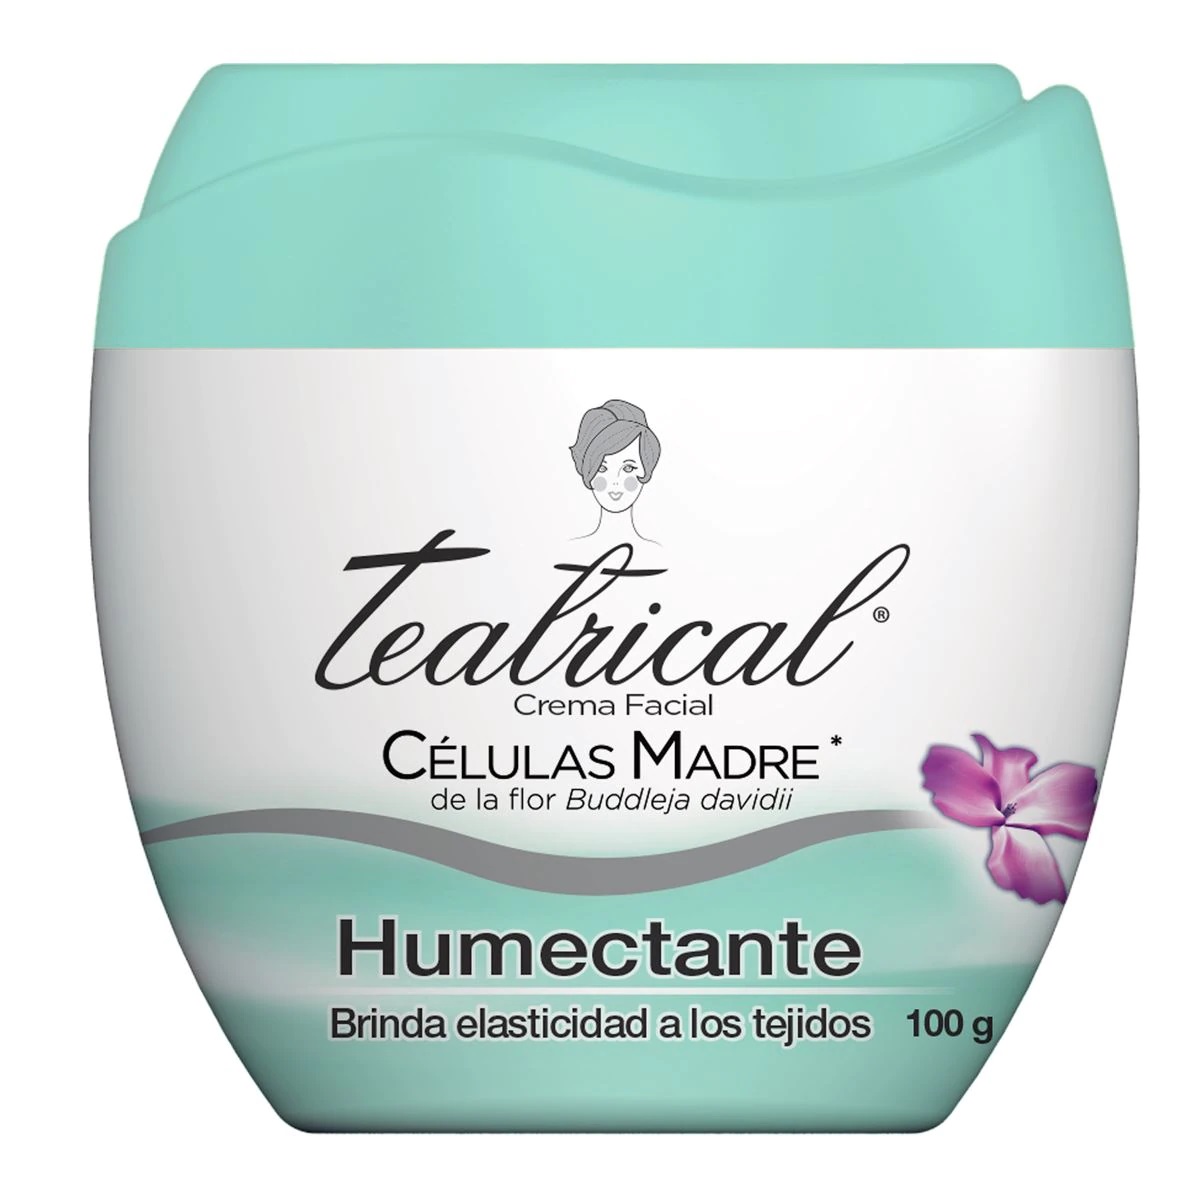 CR.FACIAL TEATRICAL CELMA x100HUMECTANTE